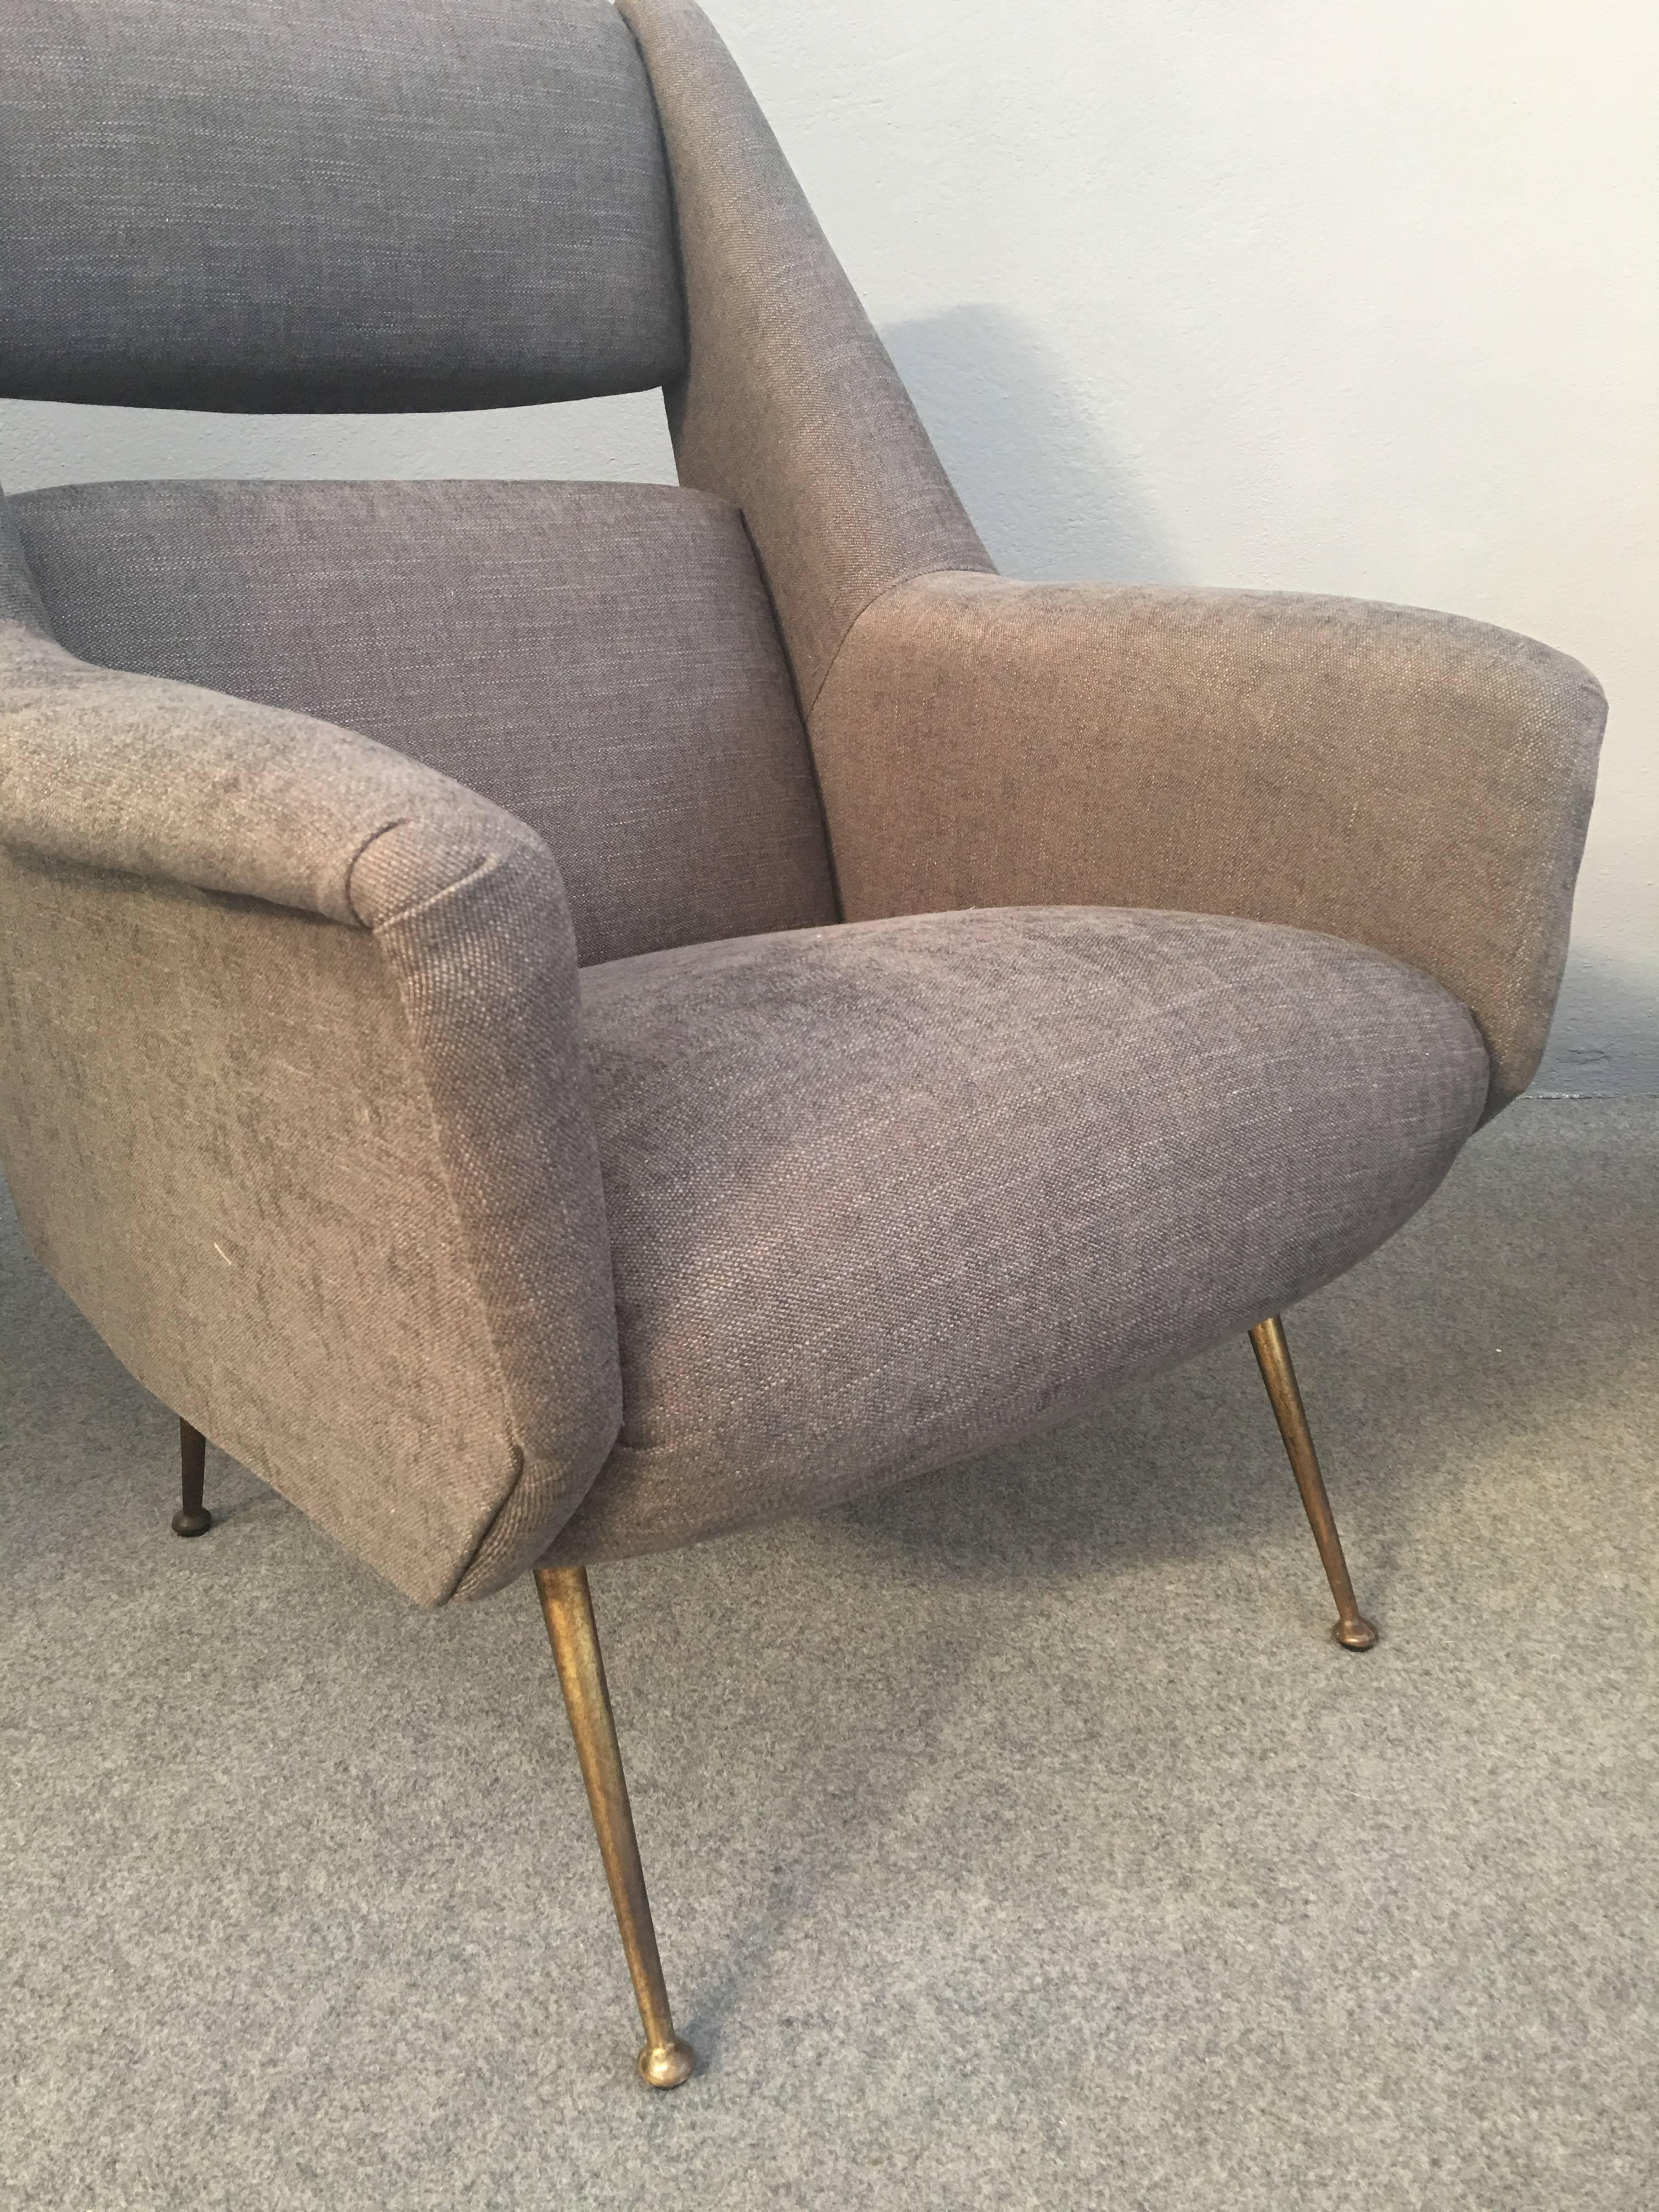 Famous and stunning Carlo de Carli armchairs, solid brass legs.
Newly upholstered with grey linen.